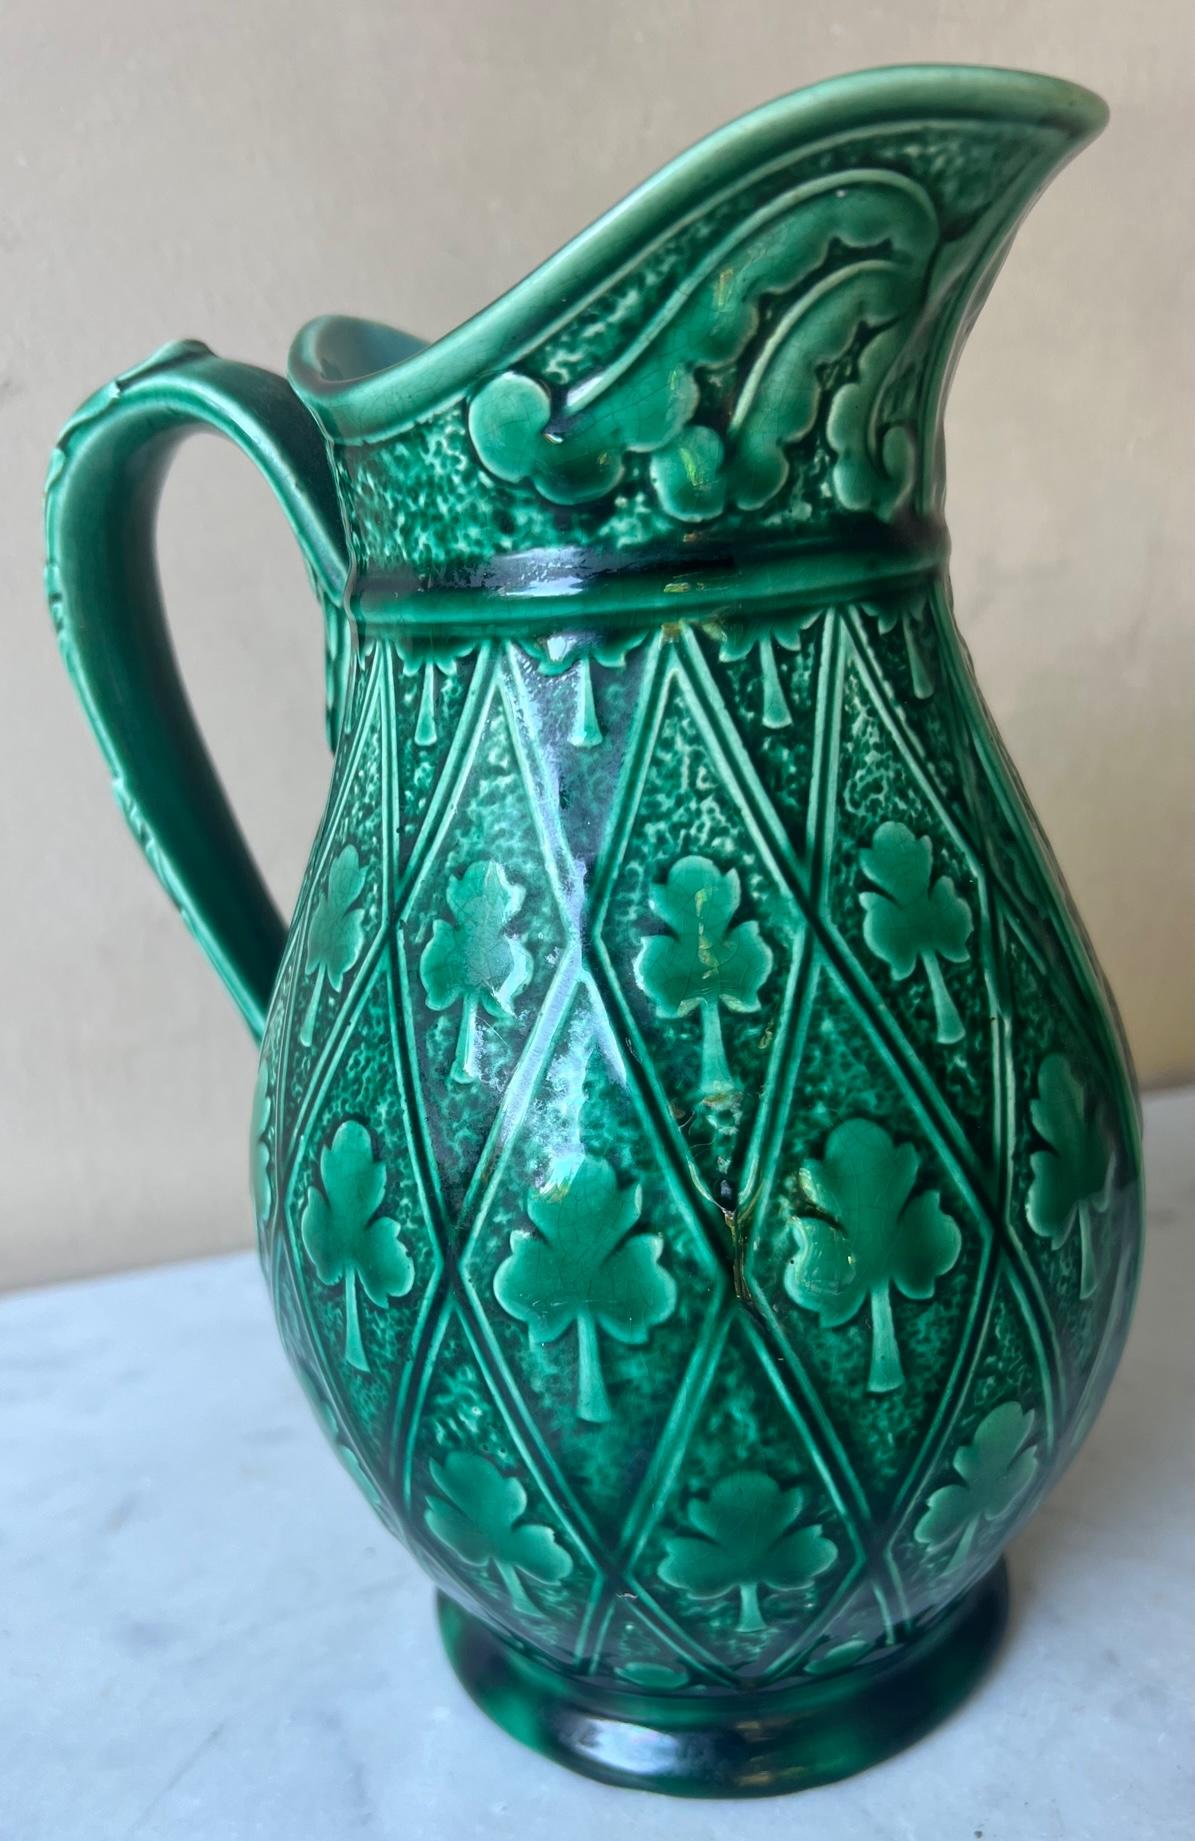 Hand-Painted Antique Vibrant Green Majolica Clover Sarreguemines Pitcher, Circa 1880's For Sale